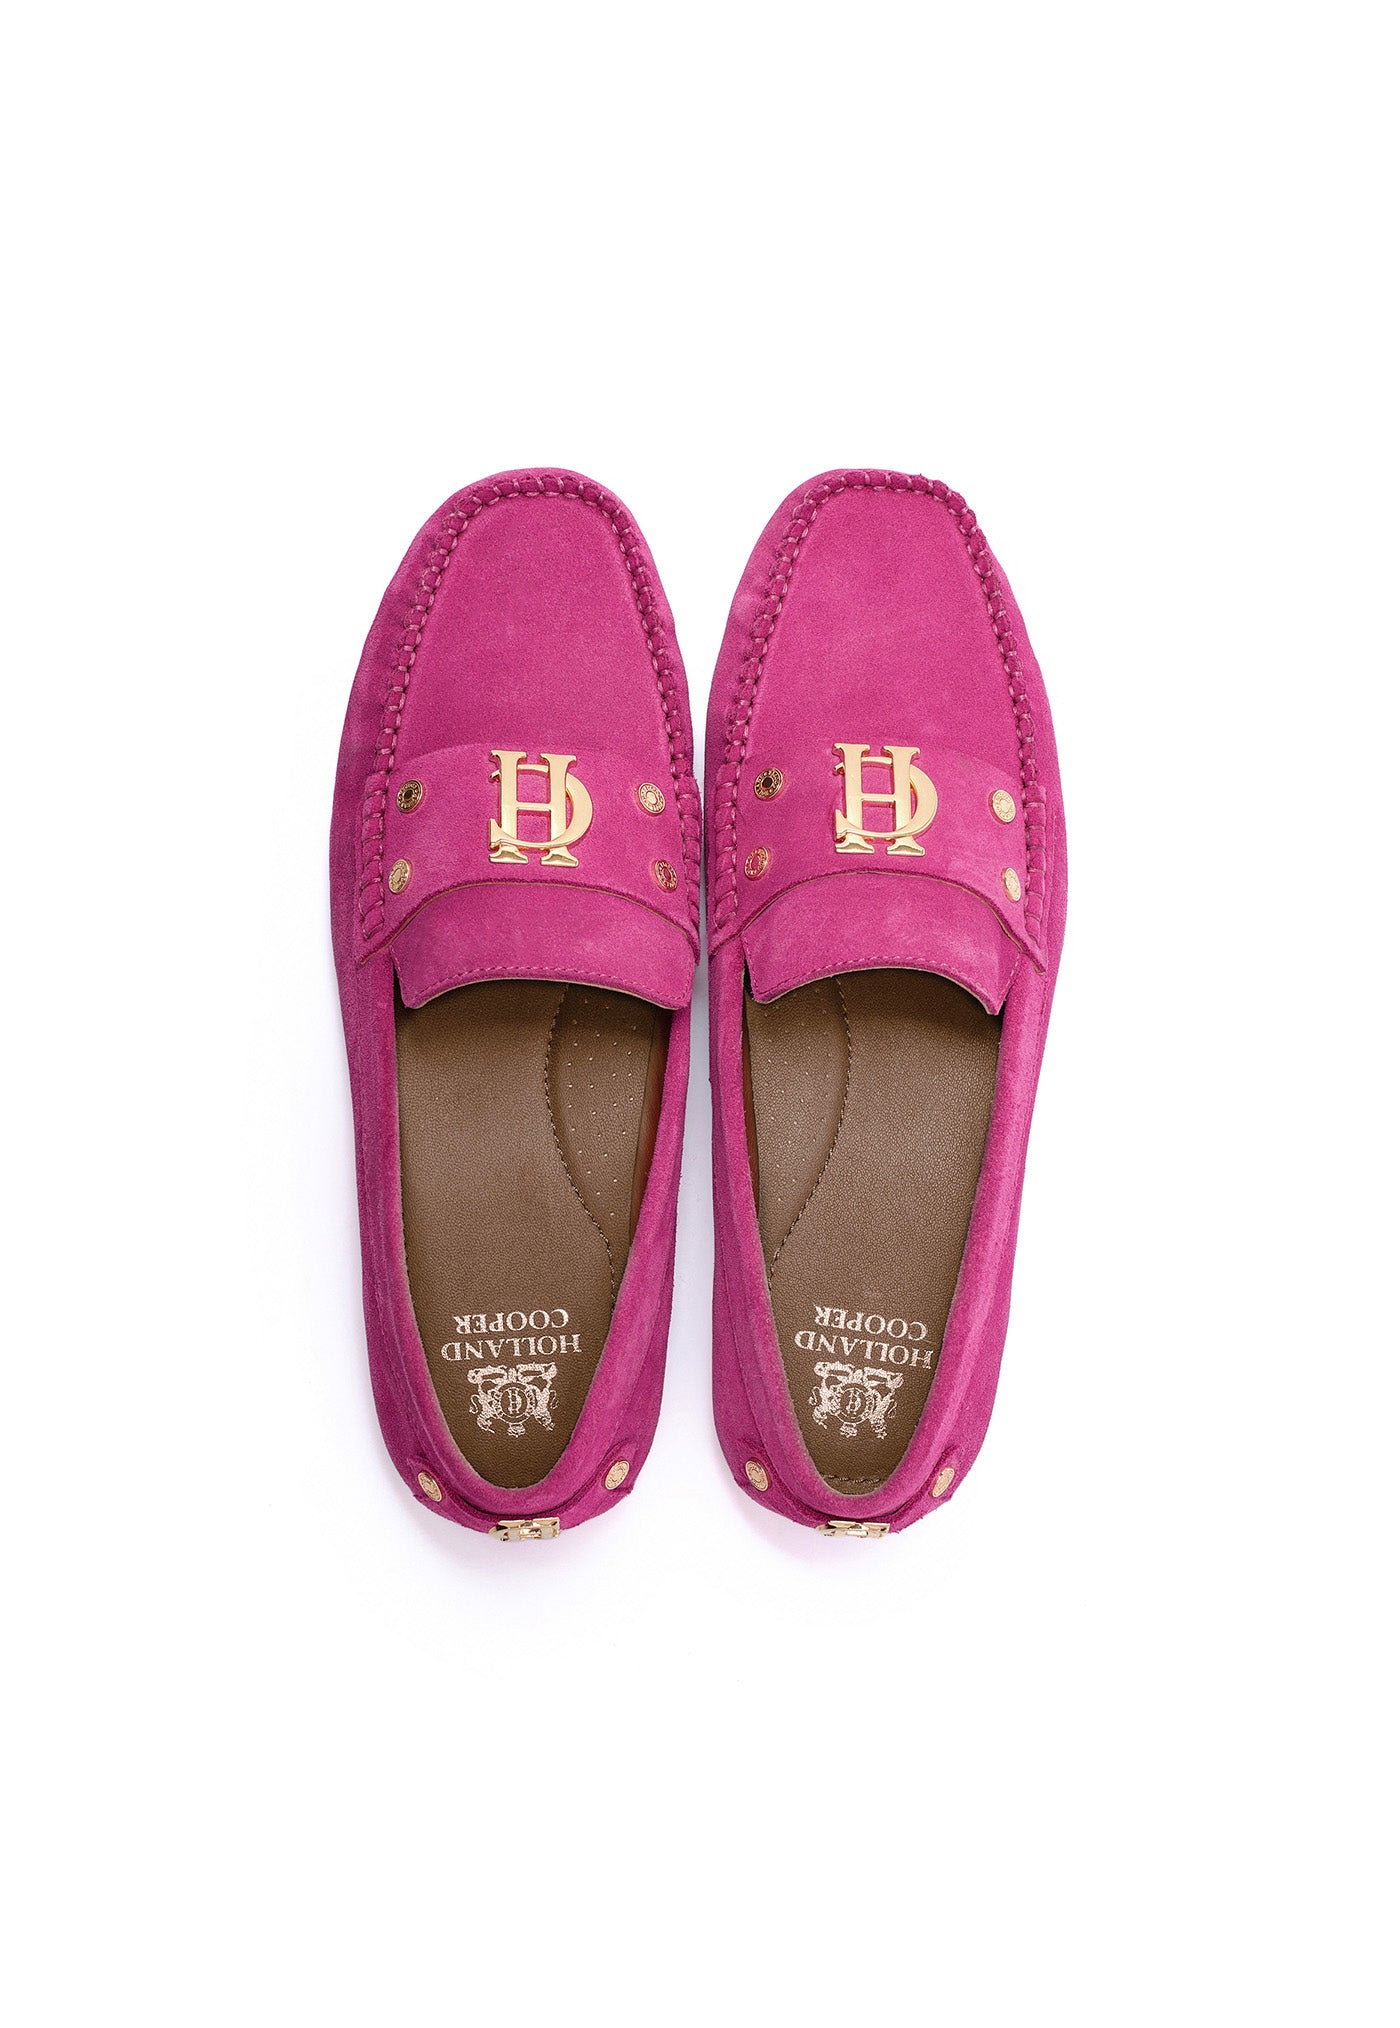 The Driving Loafer - Fushia sold by Angel Divine